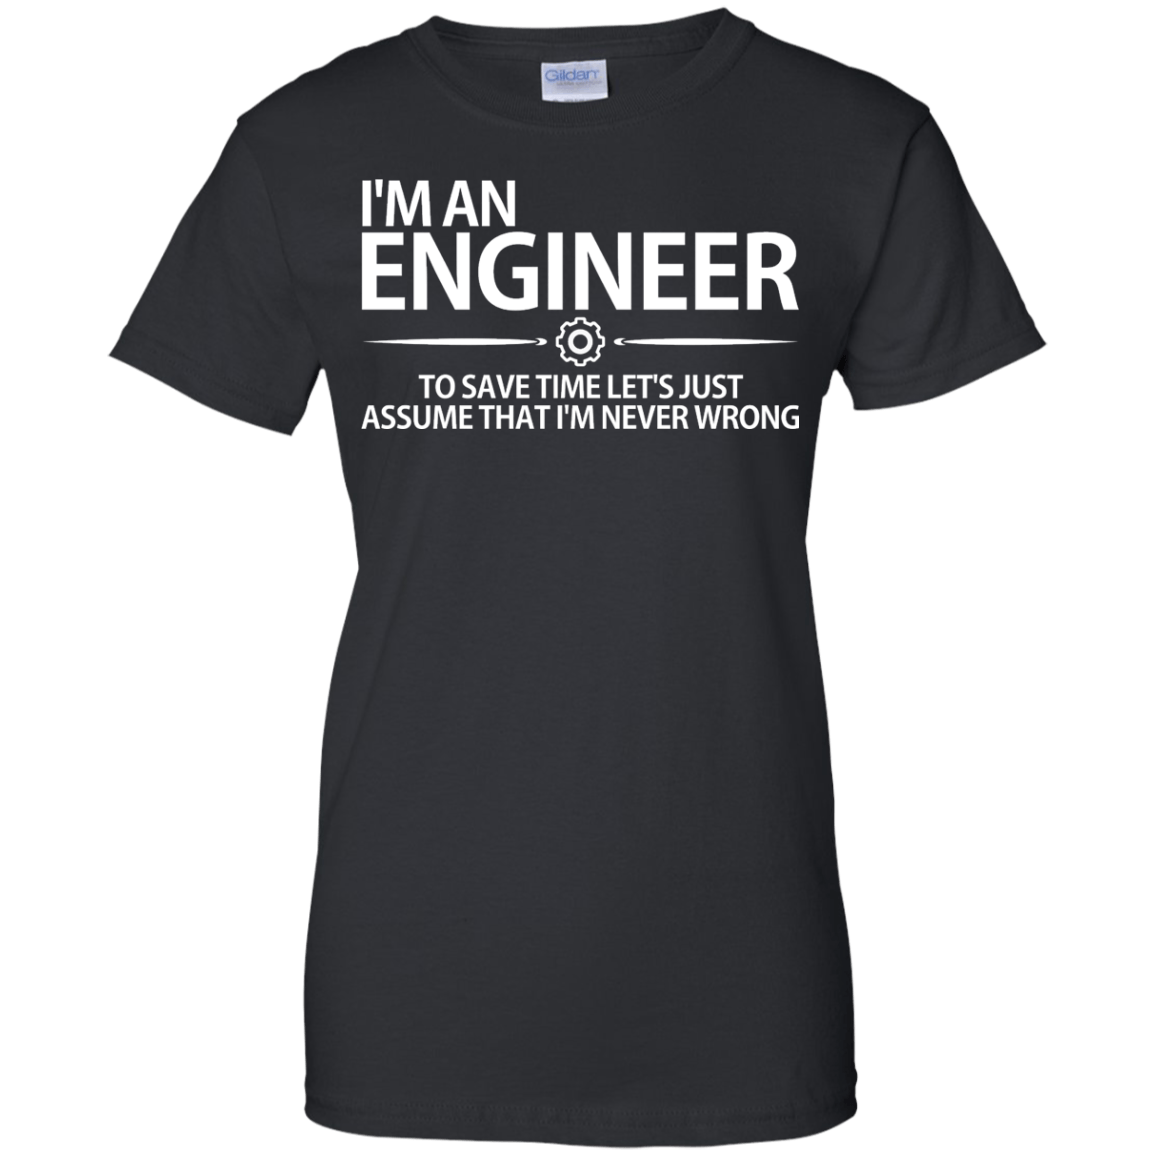 I'm An Engineer - To Save Time Let's Just Assume That I'm Never Wrong - Engineering Outfitters